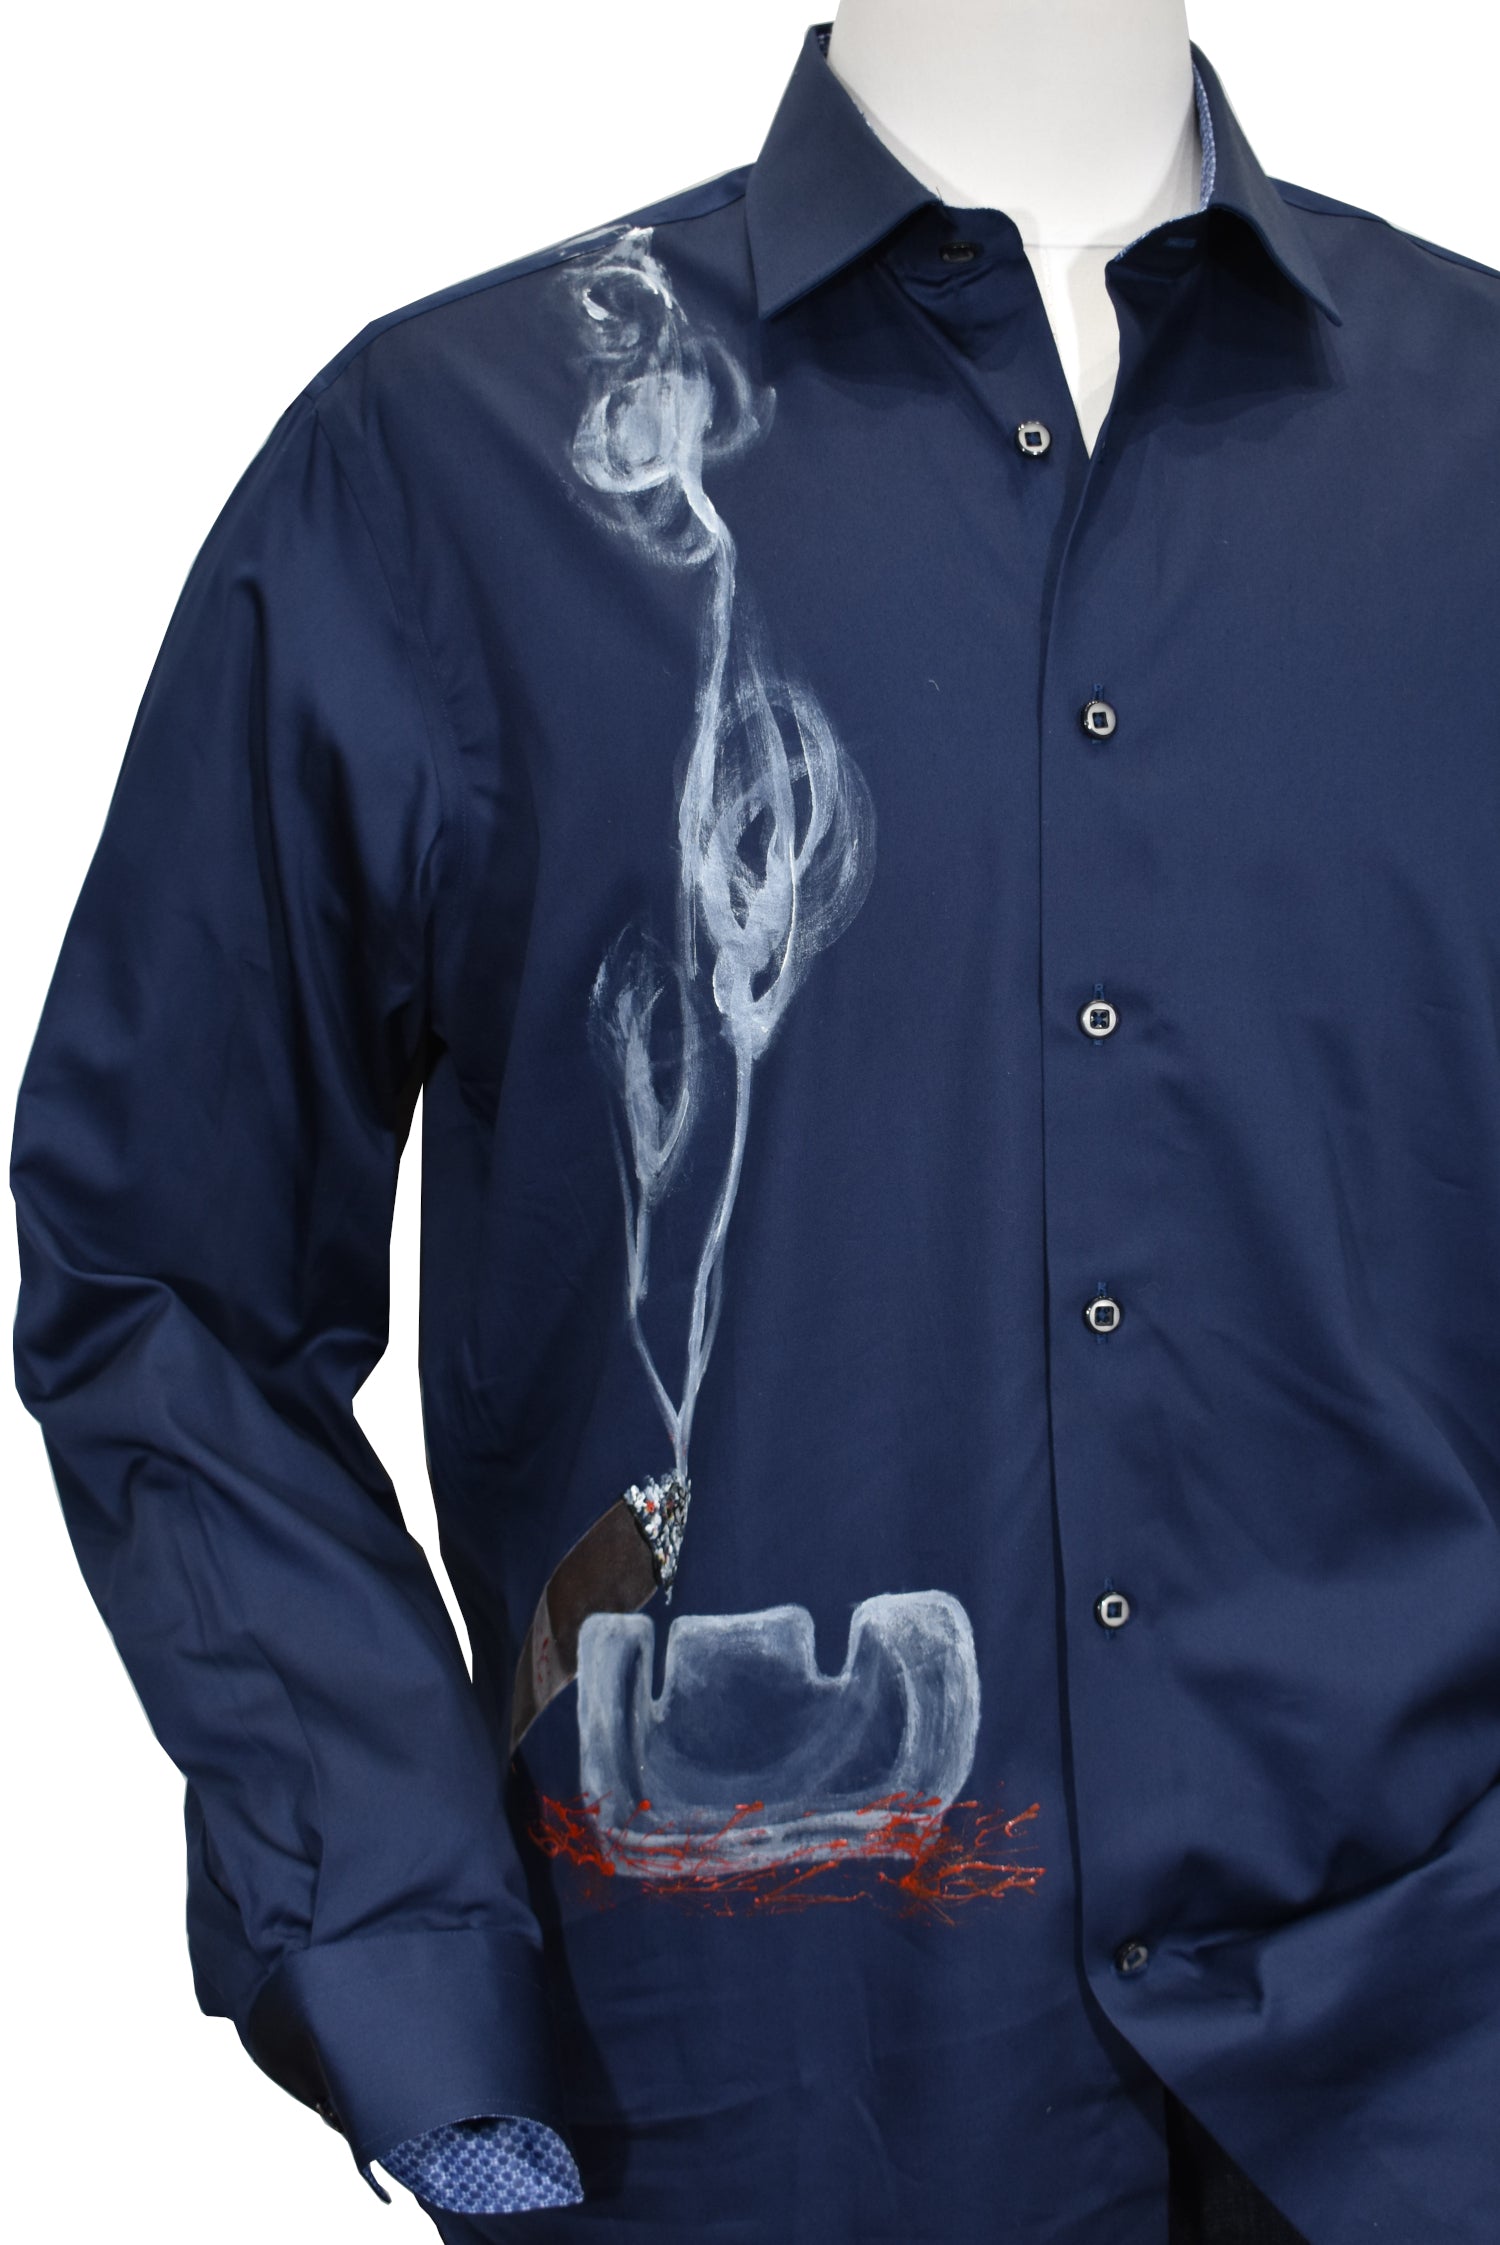 Be unique and stand out with this one-of-a-kind Marcello Hand Painted Cigar shirt. Crafted with luxurious cotton sateen fabric for a soft feel, its exclusive hand painted design will have heads turning. Dare to be bold with this must-have piece! by Marcello